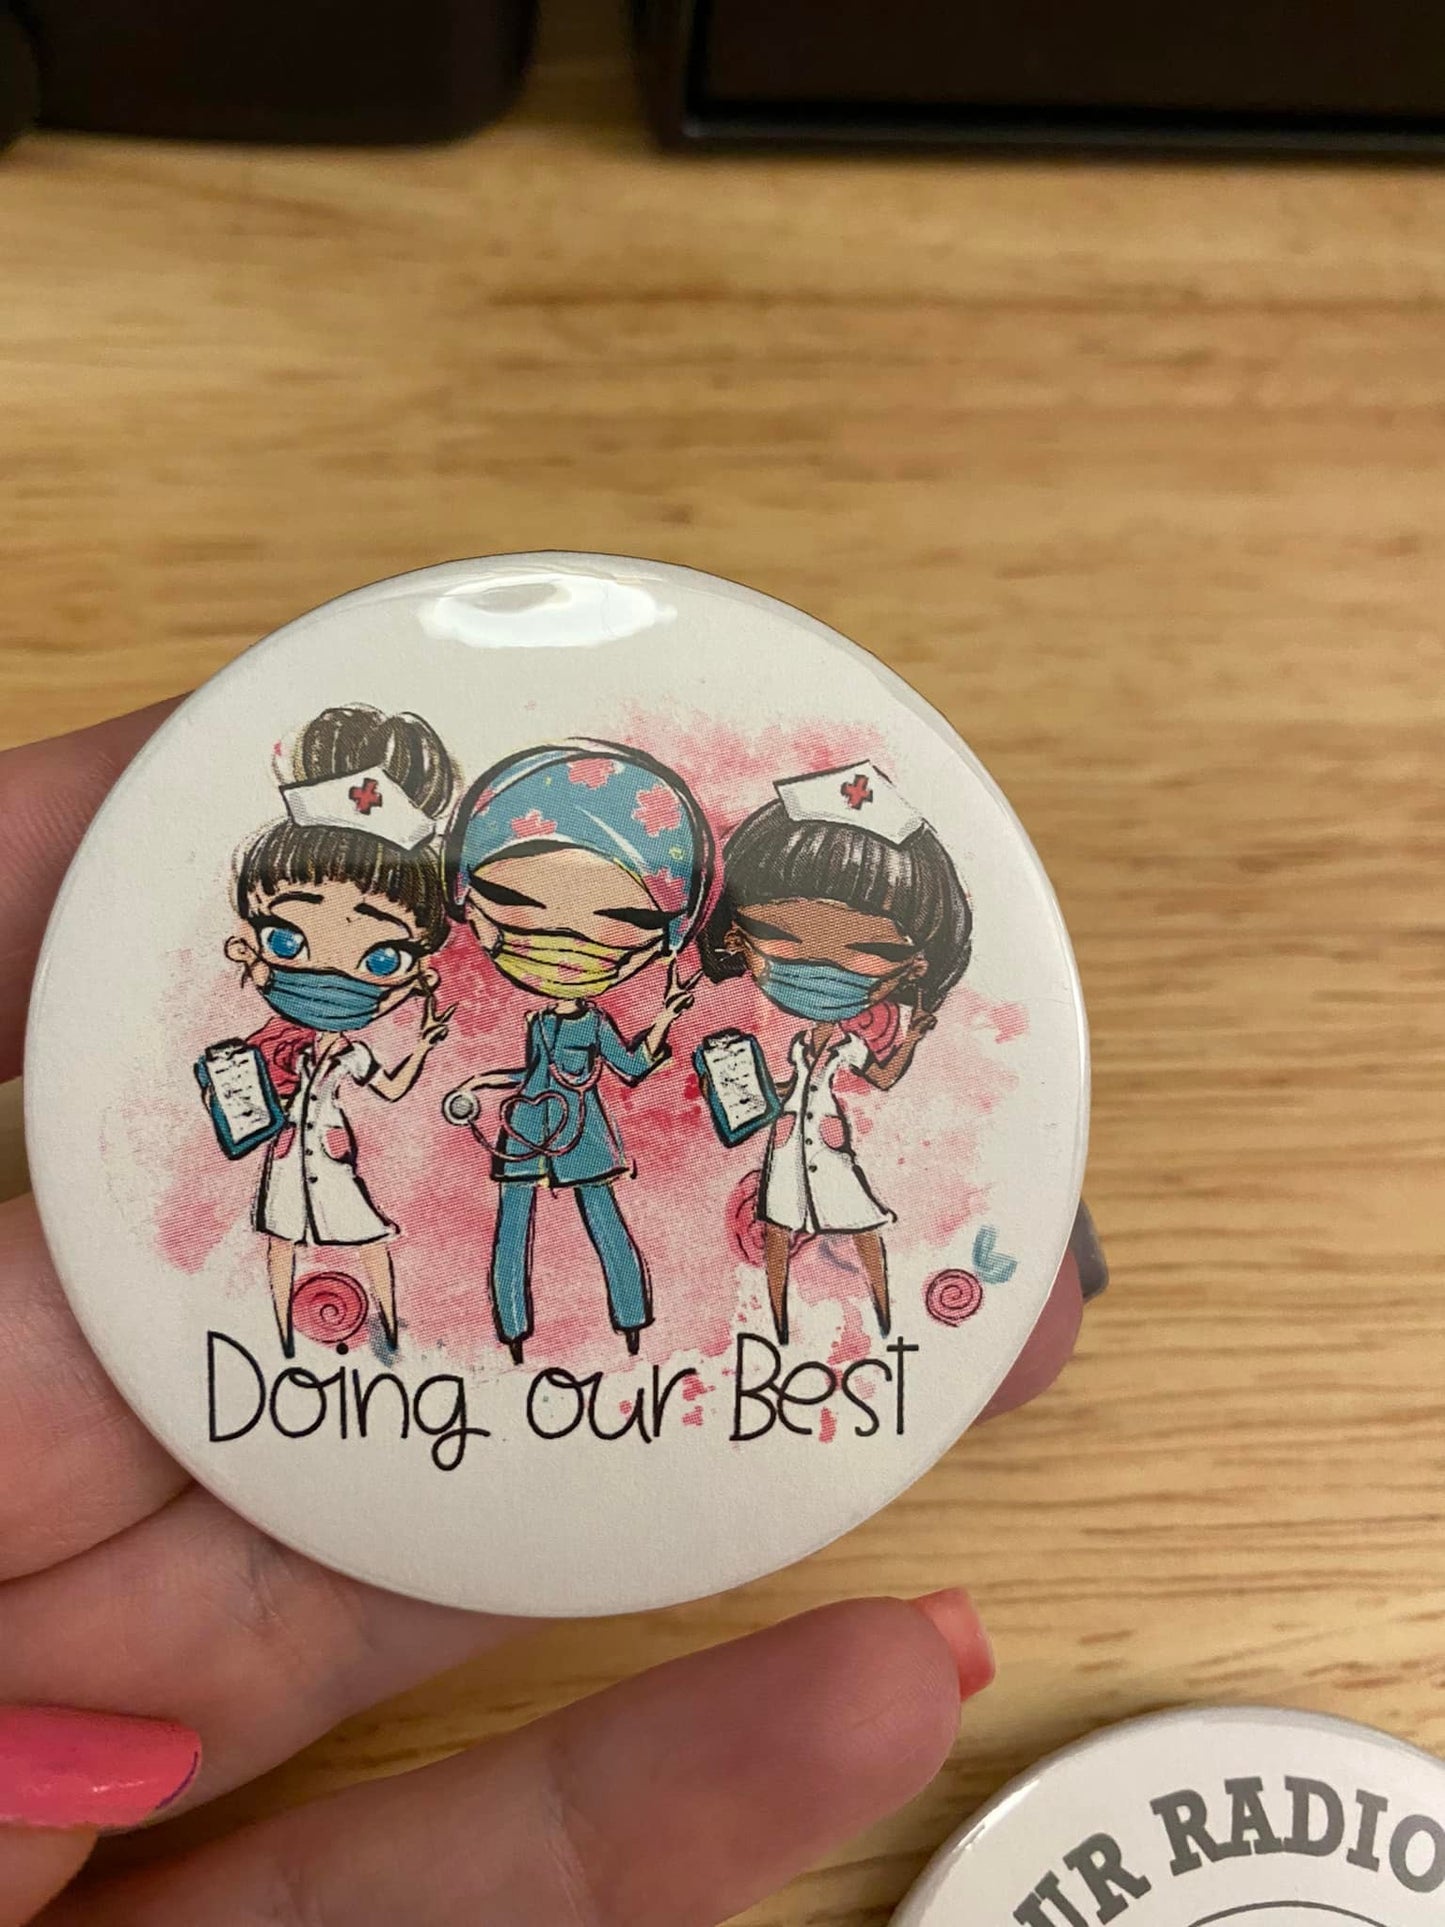 Doing Our Best 1.25" / 2.25" Button Pin